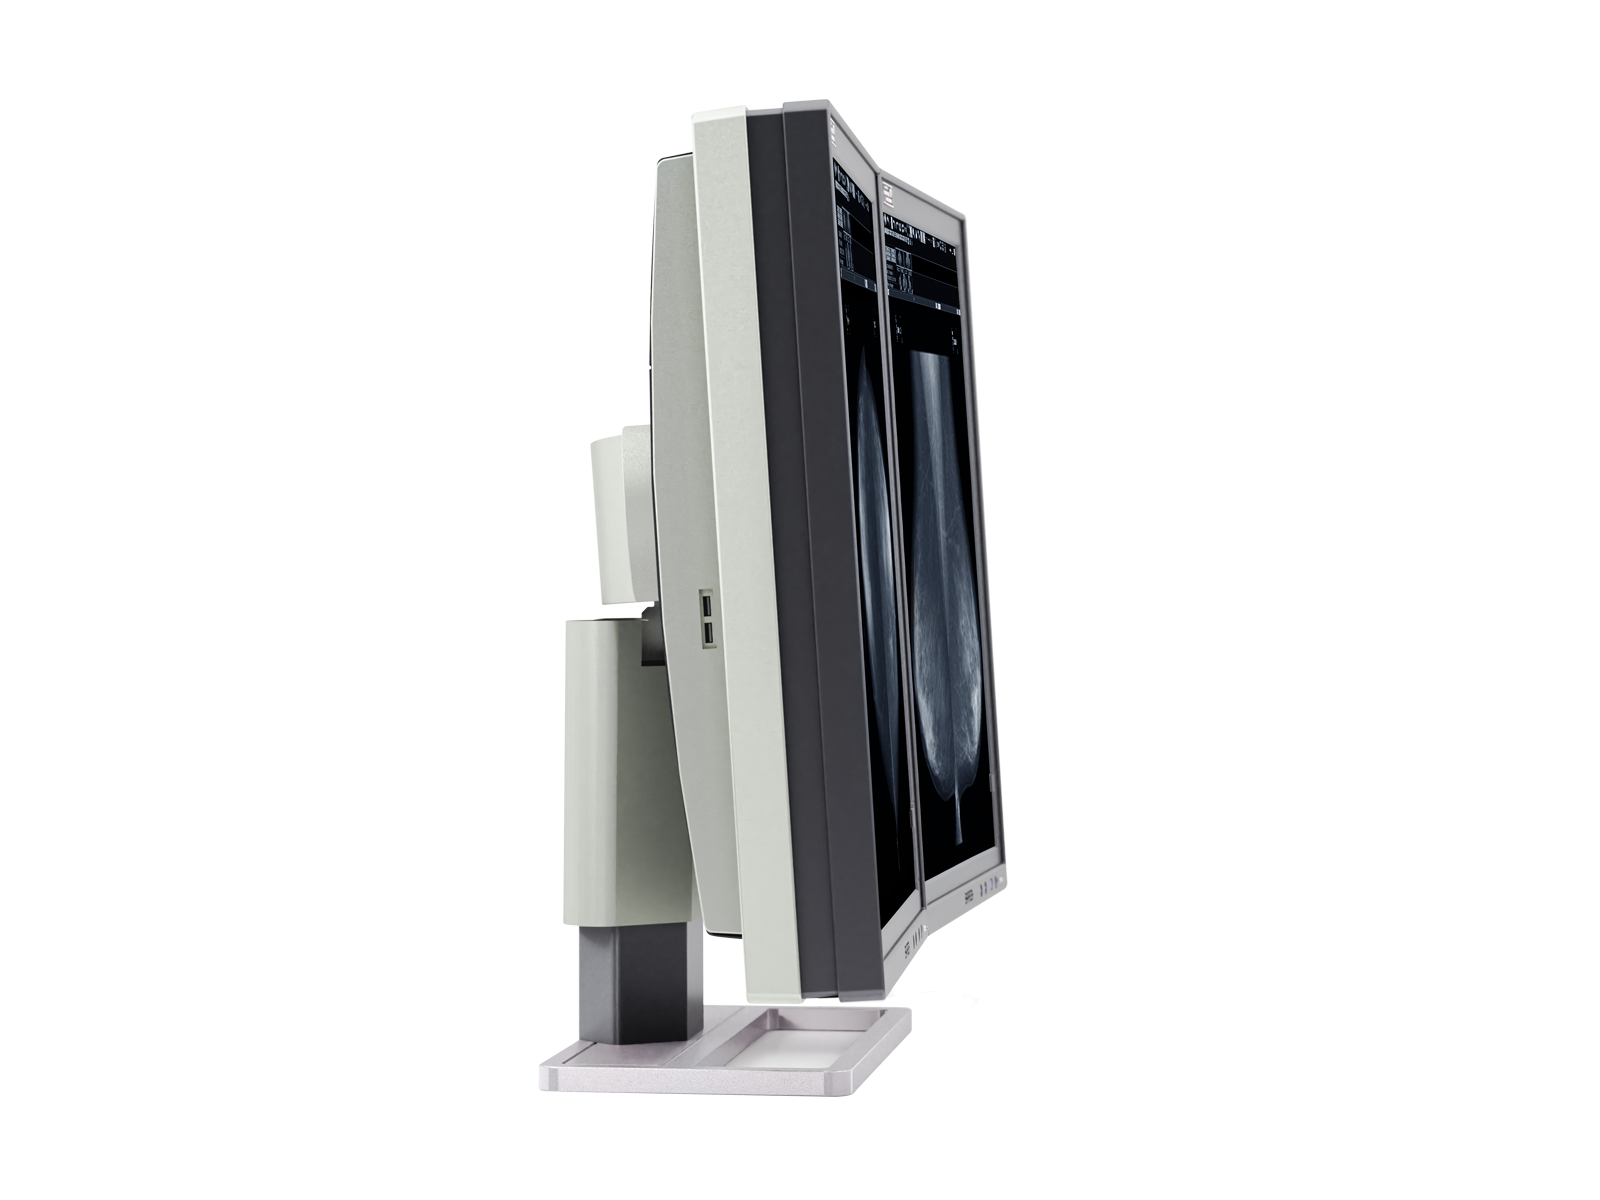 Barco Coronis MDMG-5221 5MP 21" Grayscale Tomosynthesis LED 3D-DBT Mammography Display Monitors.com 